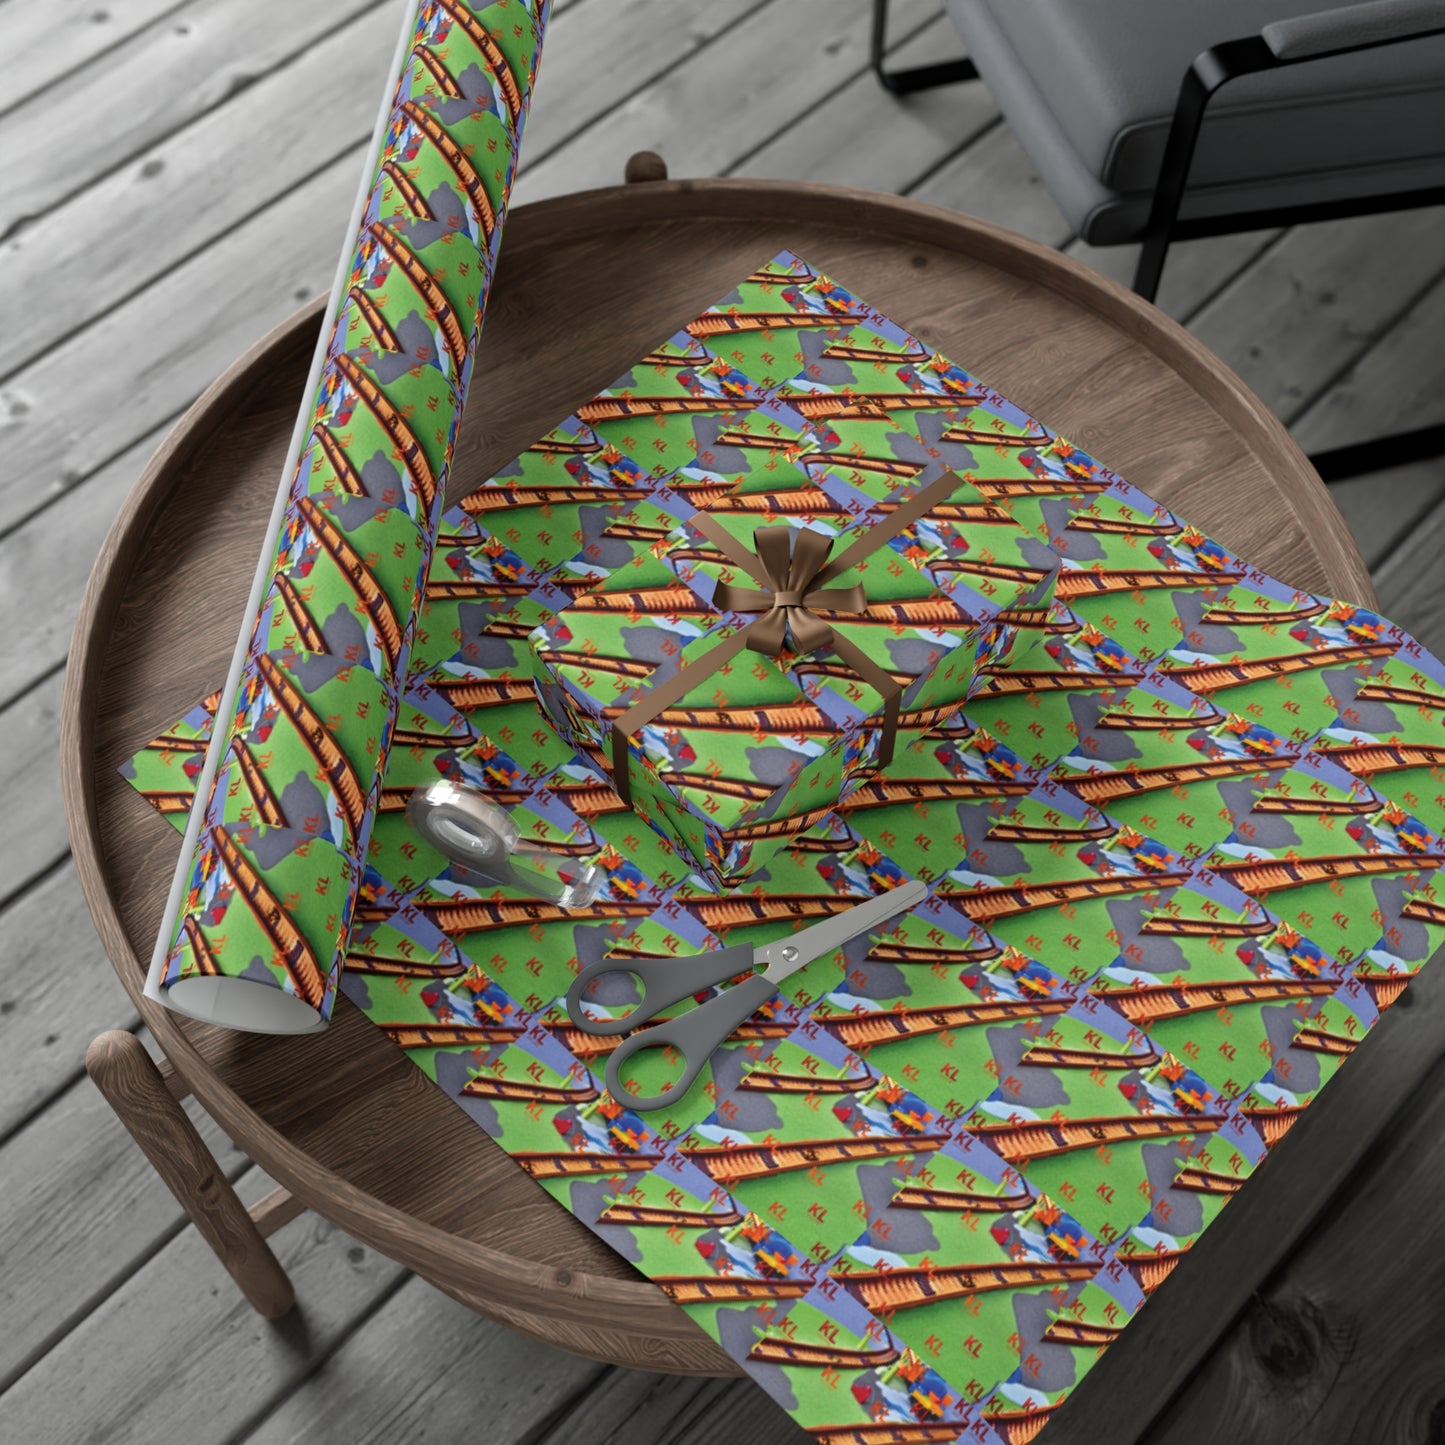 Train Tracks - Gift Wrap Papers